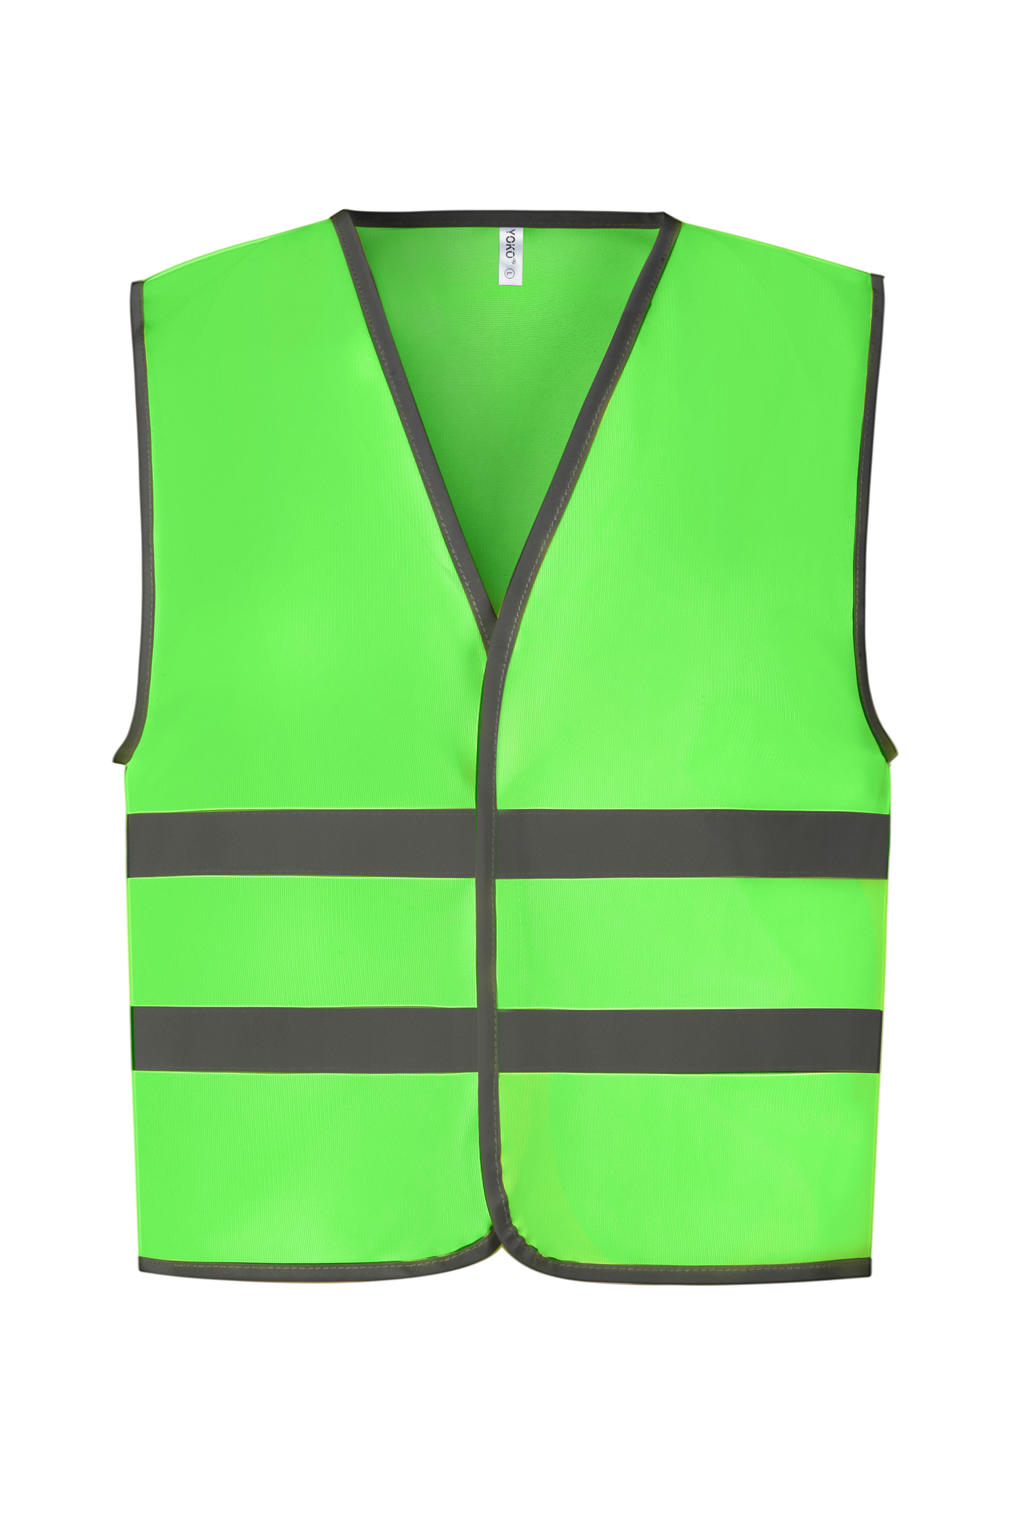  Kids Fluo Reflective Border Waistcoat in Farbe Lime